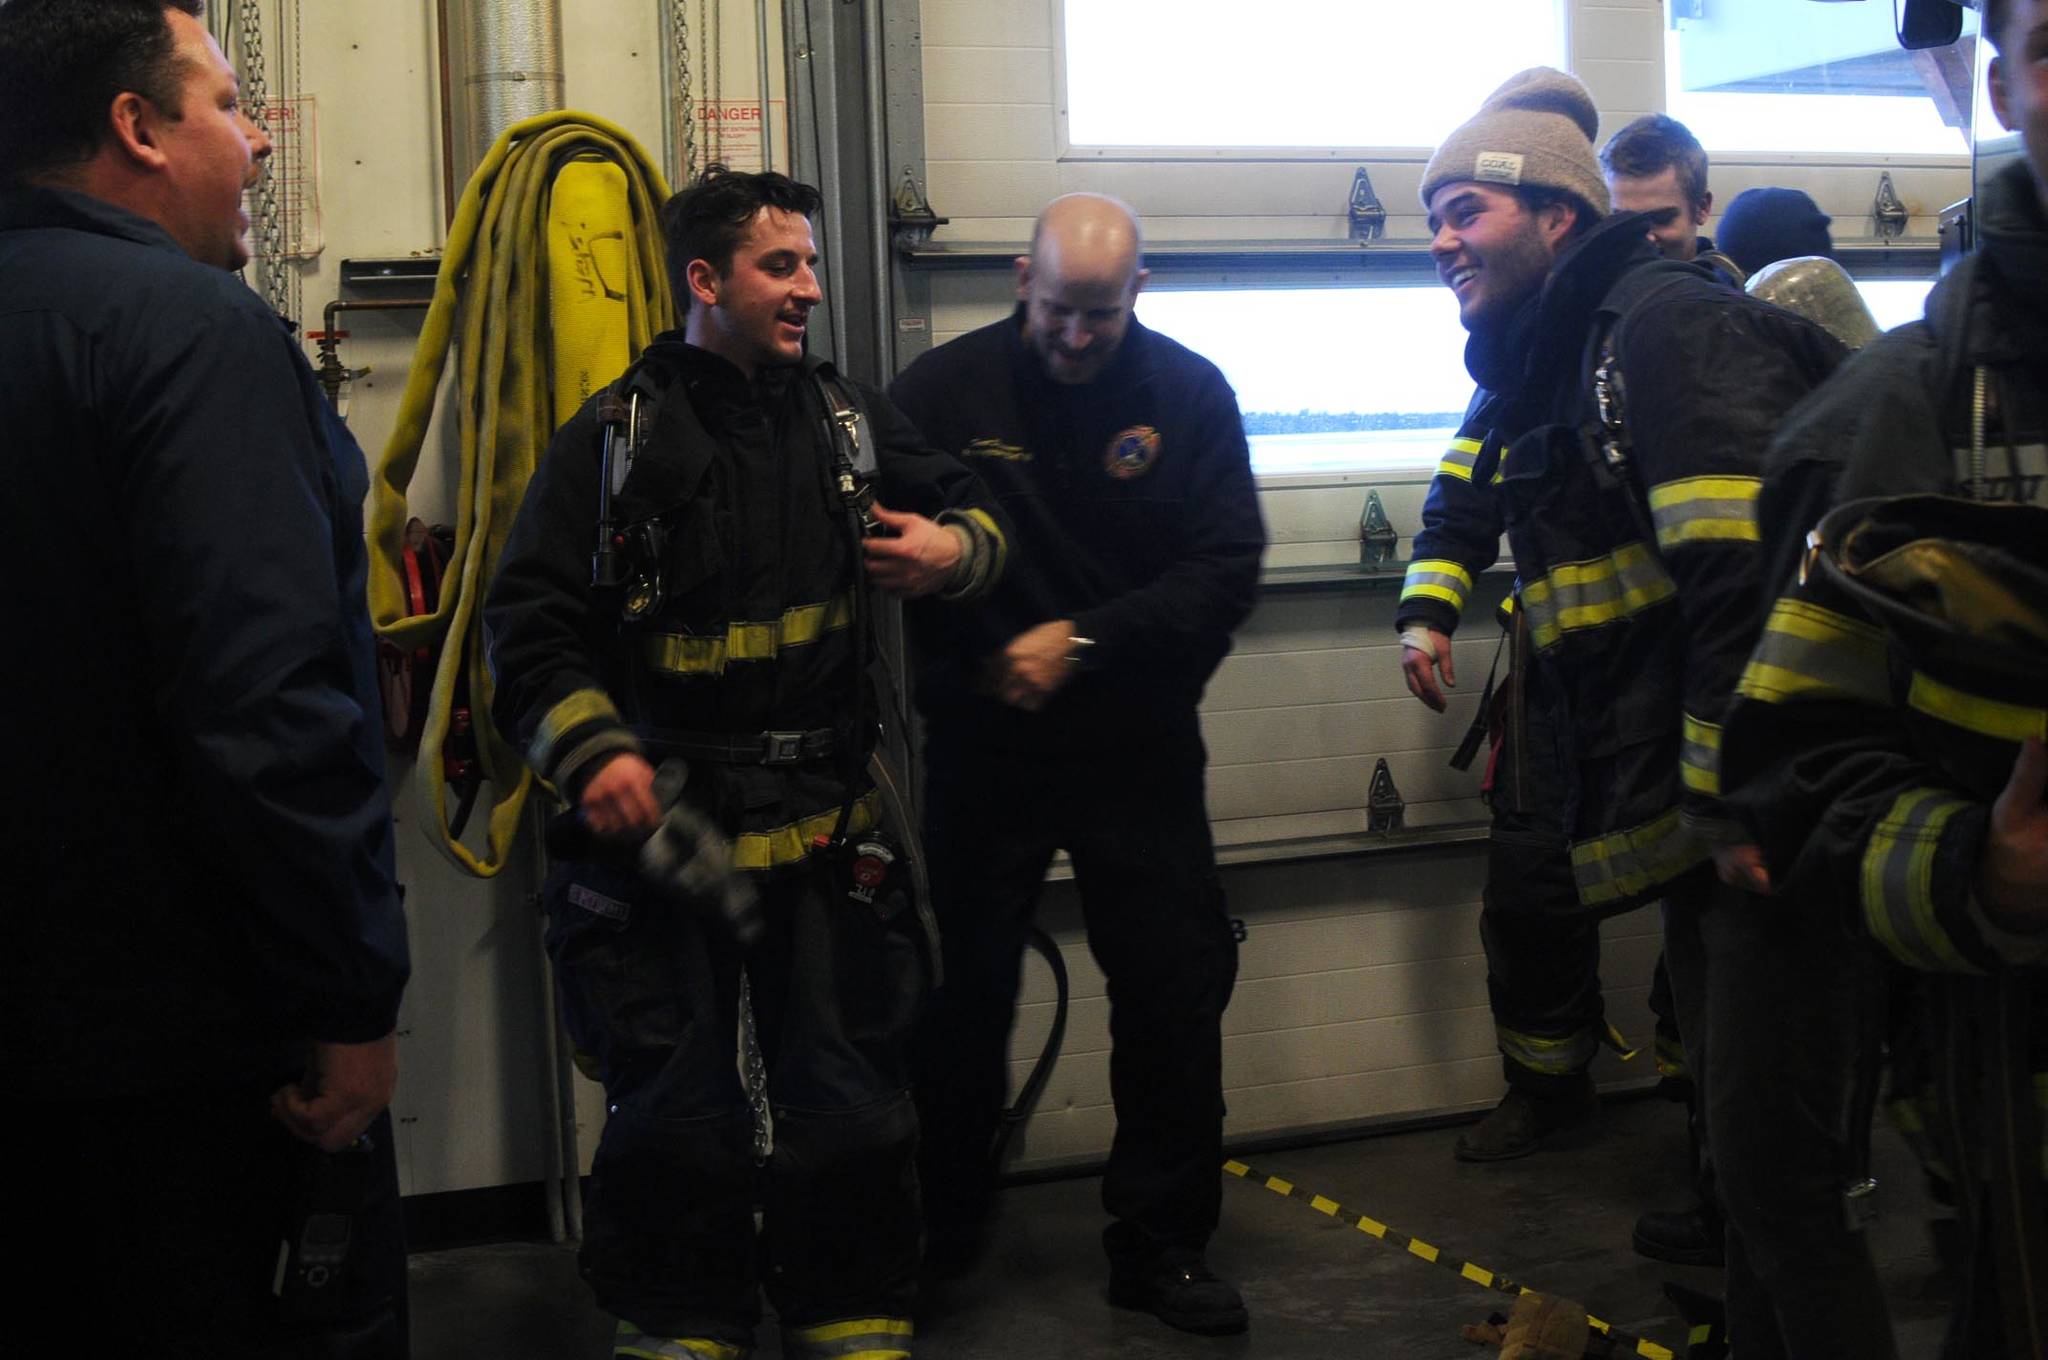 Kenai Fire Marshal Tommy Carver talks to the Kenai River Brown Bears hockey team players during a tour and training demonstratoin at the Kenai Emergency Operations Center on the Kenai Municipal Airport on Tuesday, Nov. 28, 2017 in Kenai, Alaska. Kenai Fire Department firefighters walked the Brown Bears players through some of the training and tools firefighters use to give them an idea of what a career in fire response is like. (Photo by Elizabeth Earl/Peninsula Clarion)